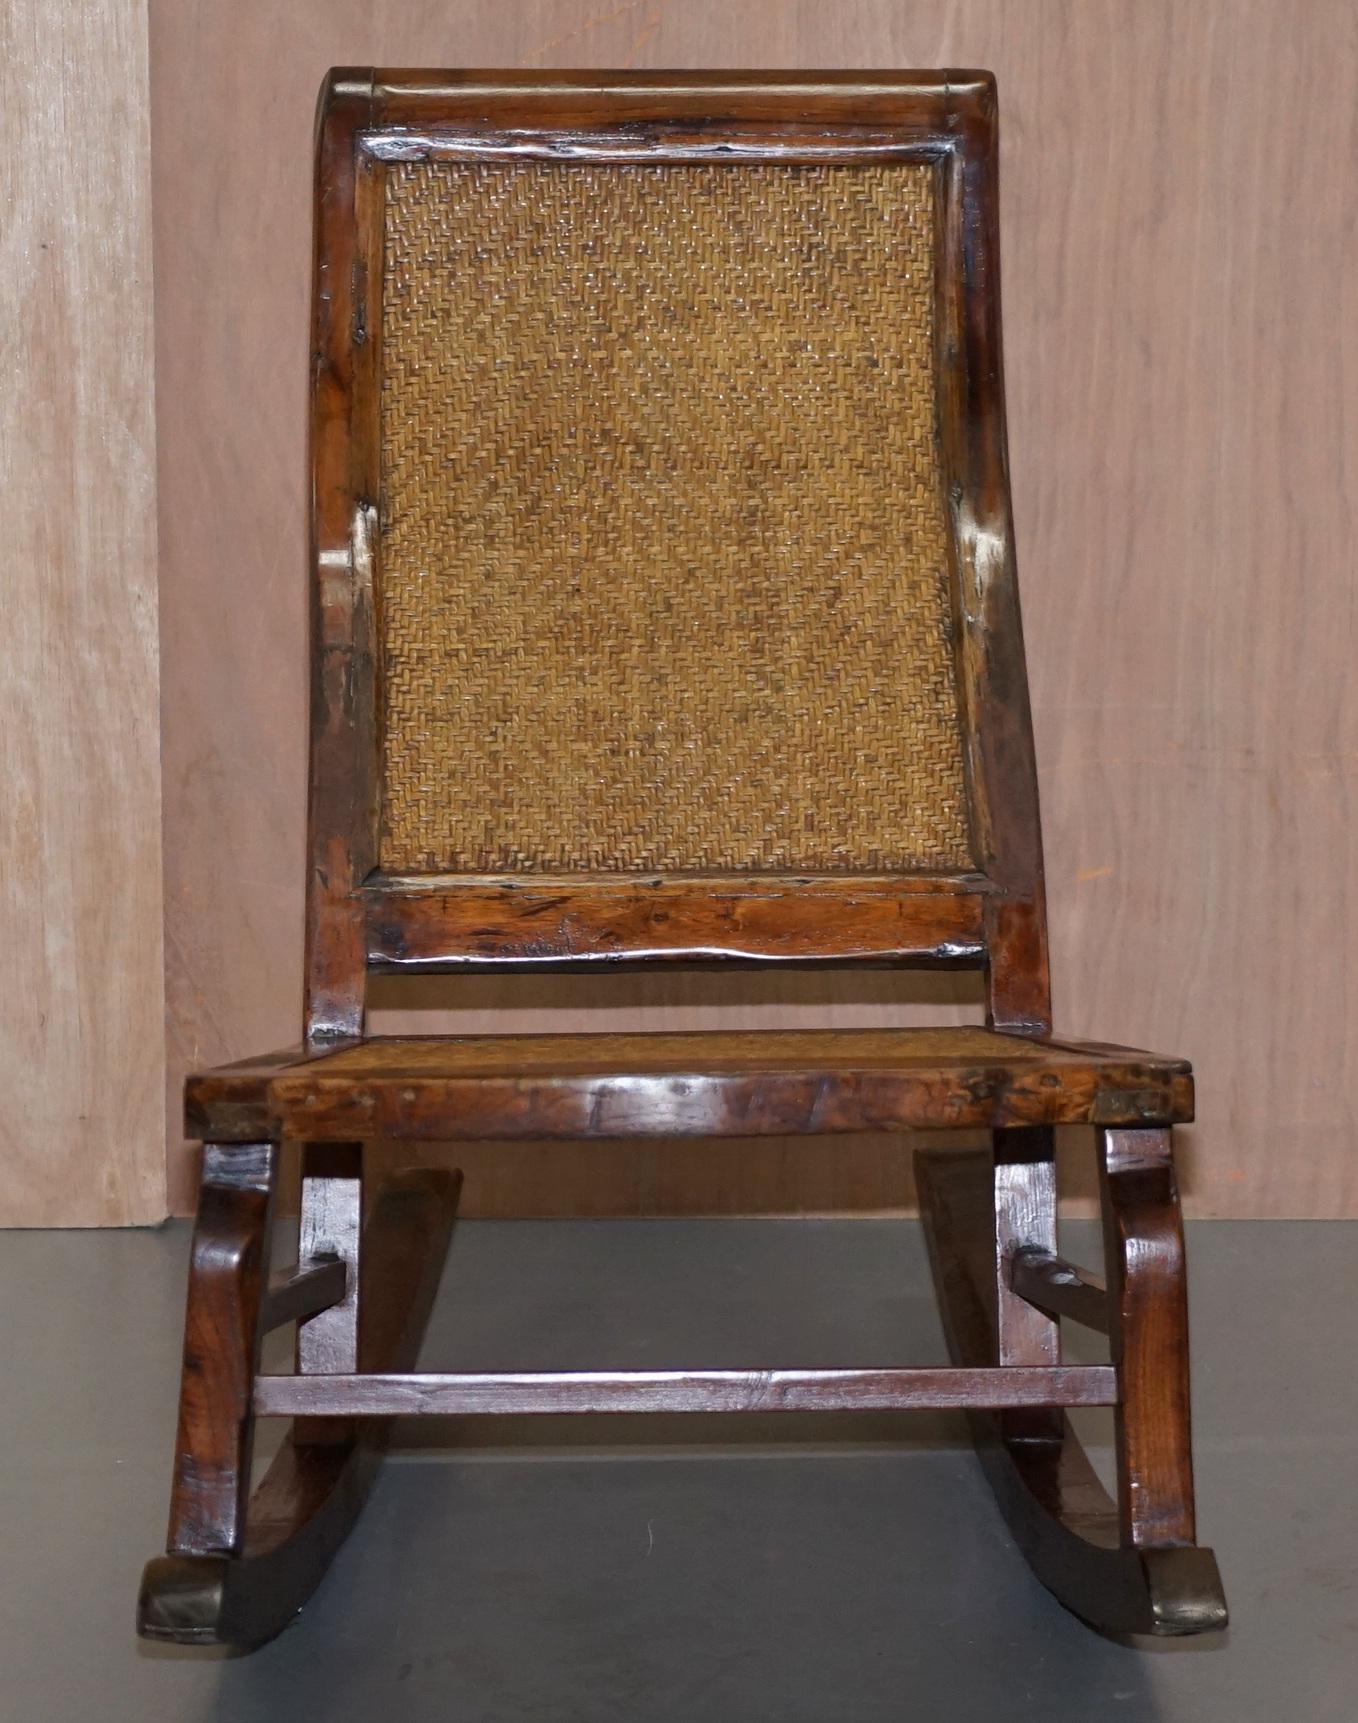 We are delighted to offer for sale this stunning small children’s antique rocking chair

A good looking well made and decorative chair, I would say it would suite children up to around 6 years old, a great display piece for dolls and teddys or a